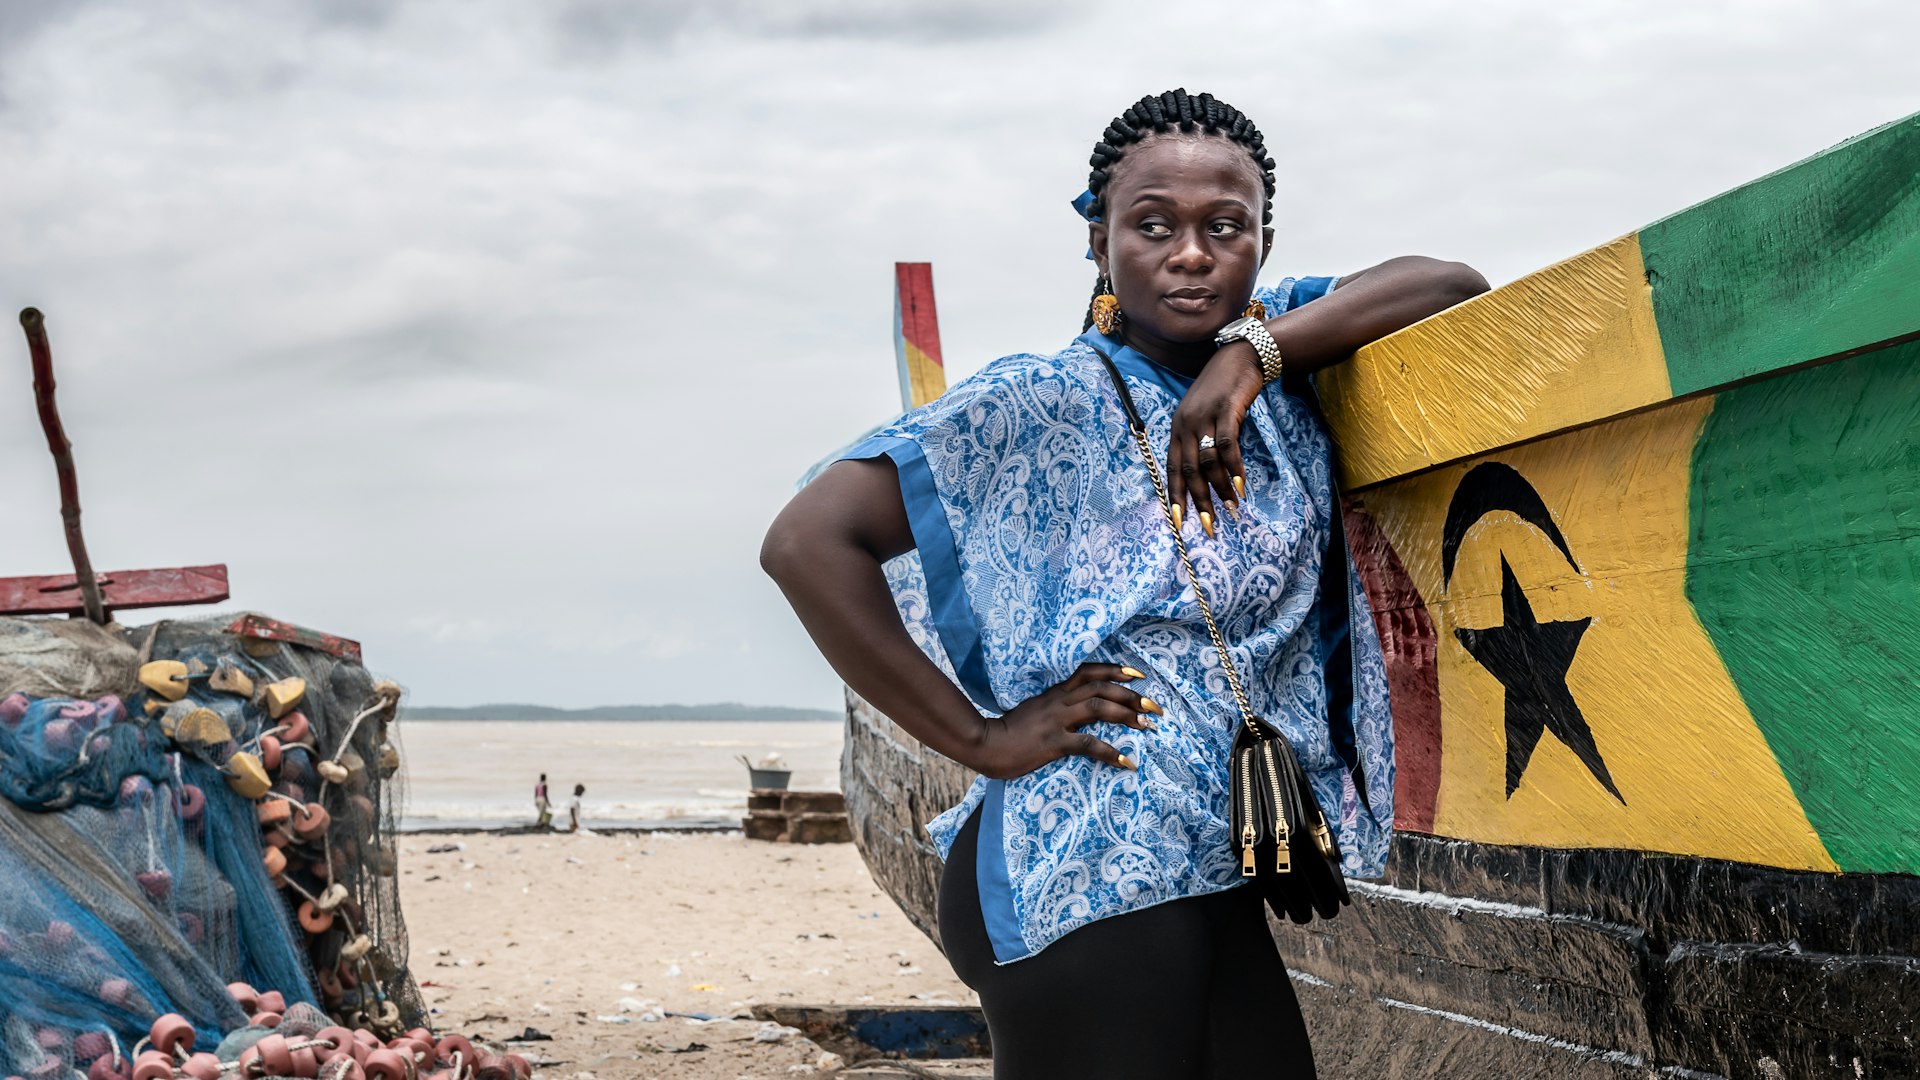 A woman stands by a fishing boat on one of the beaches in Ghana